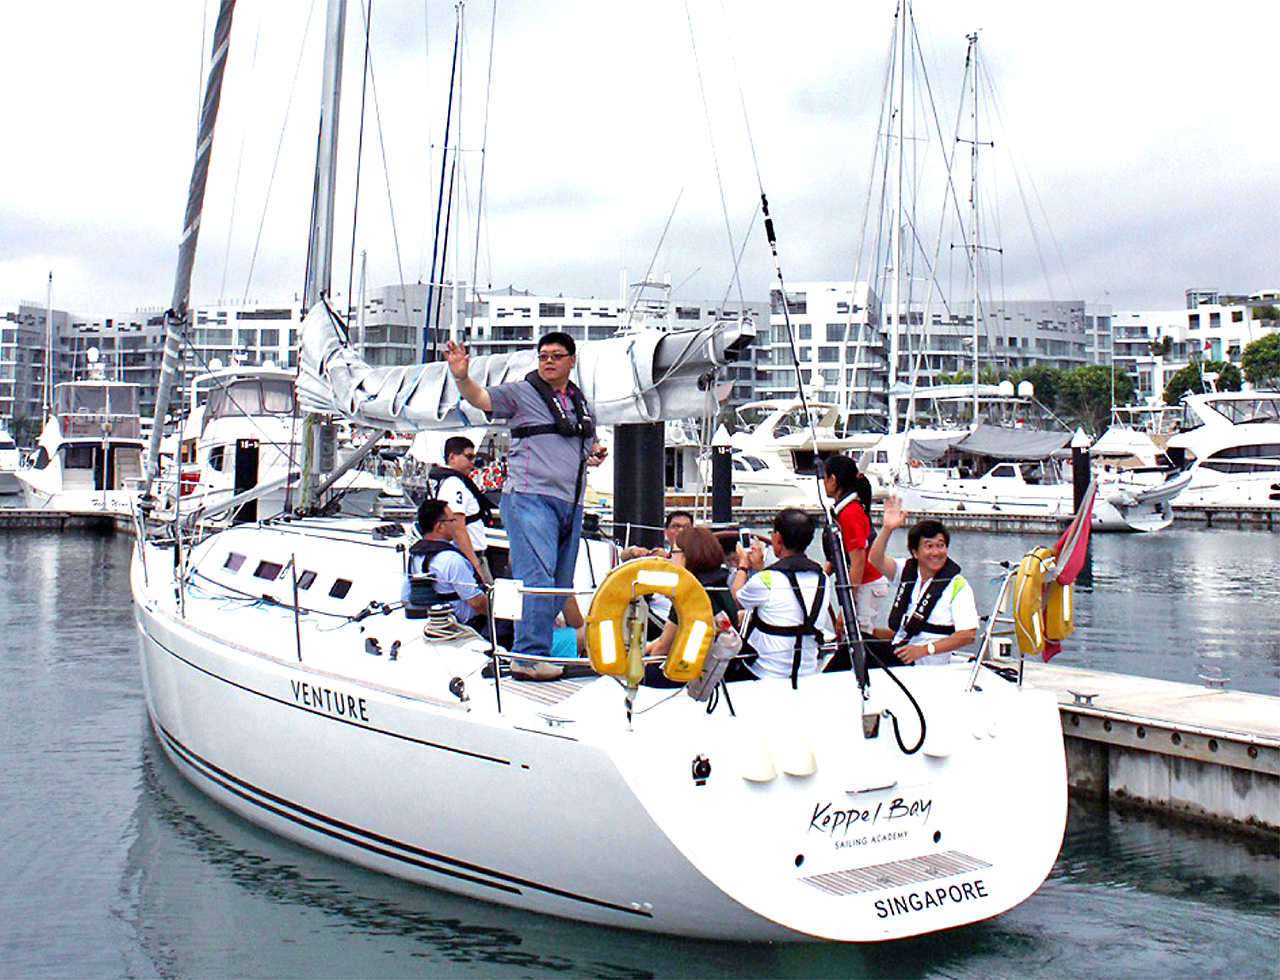 Business delegates engaging in fun yacht race for corporate teambuilding and networking